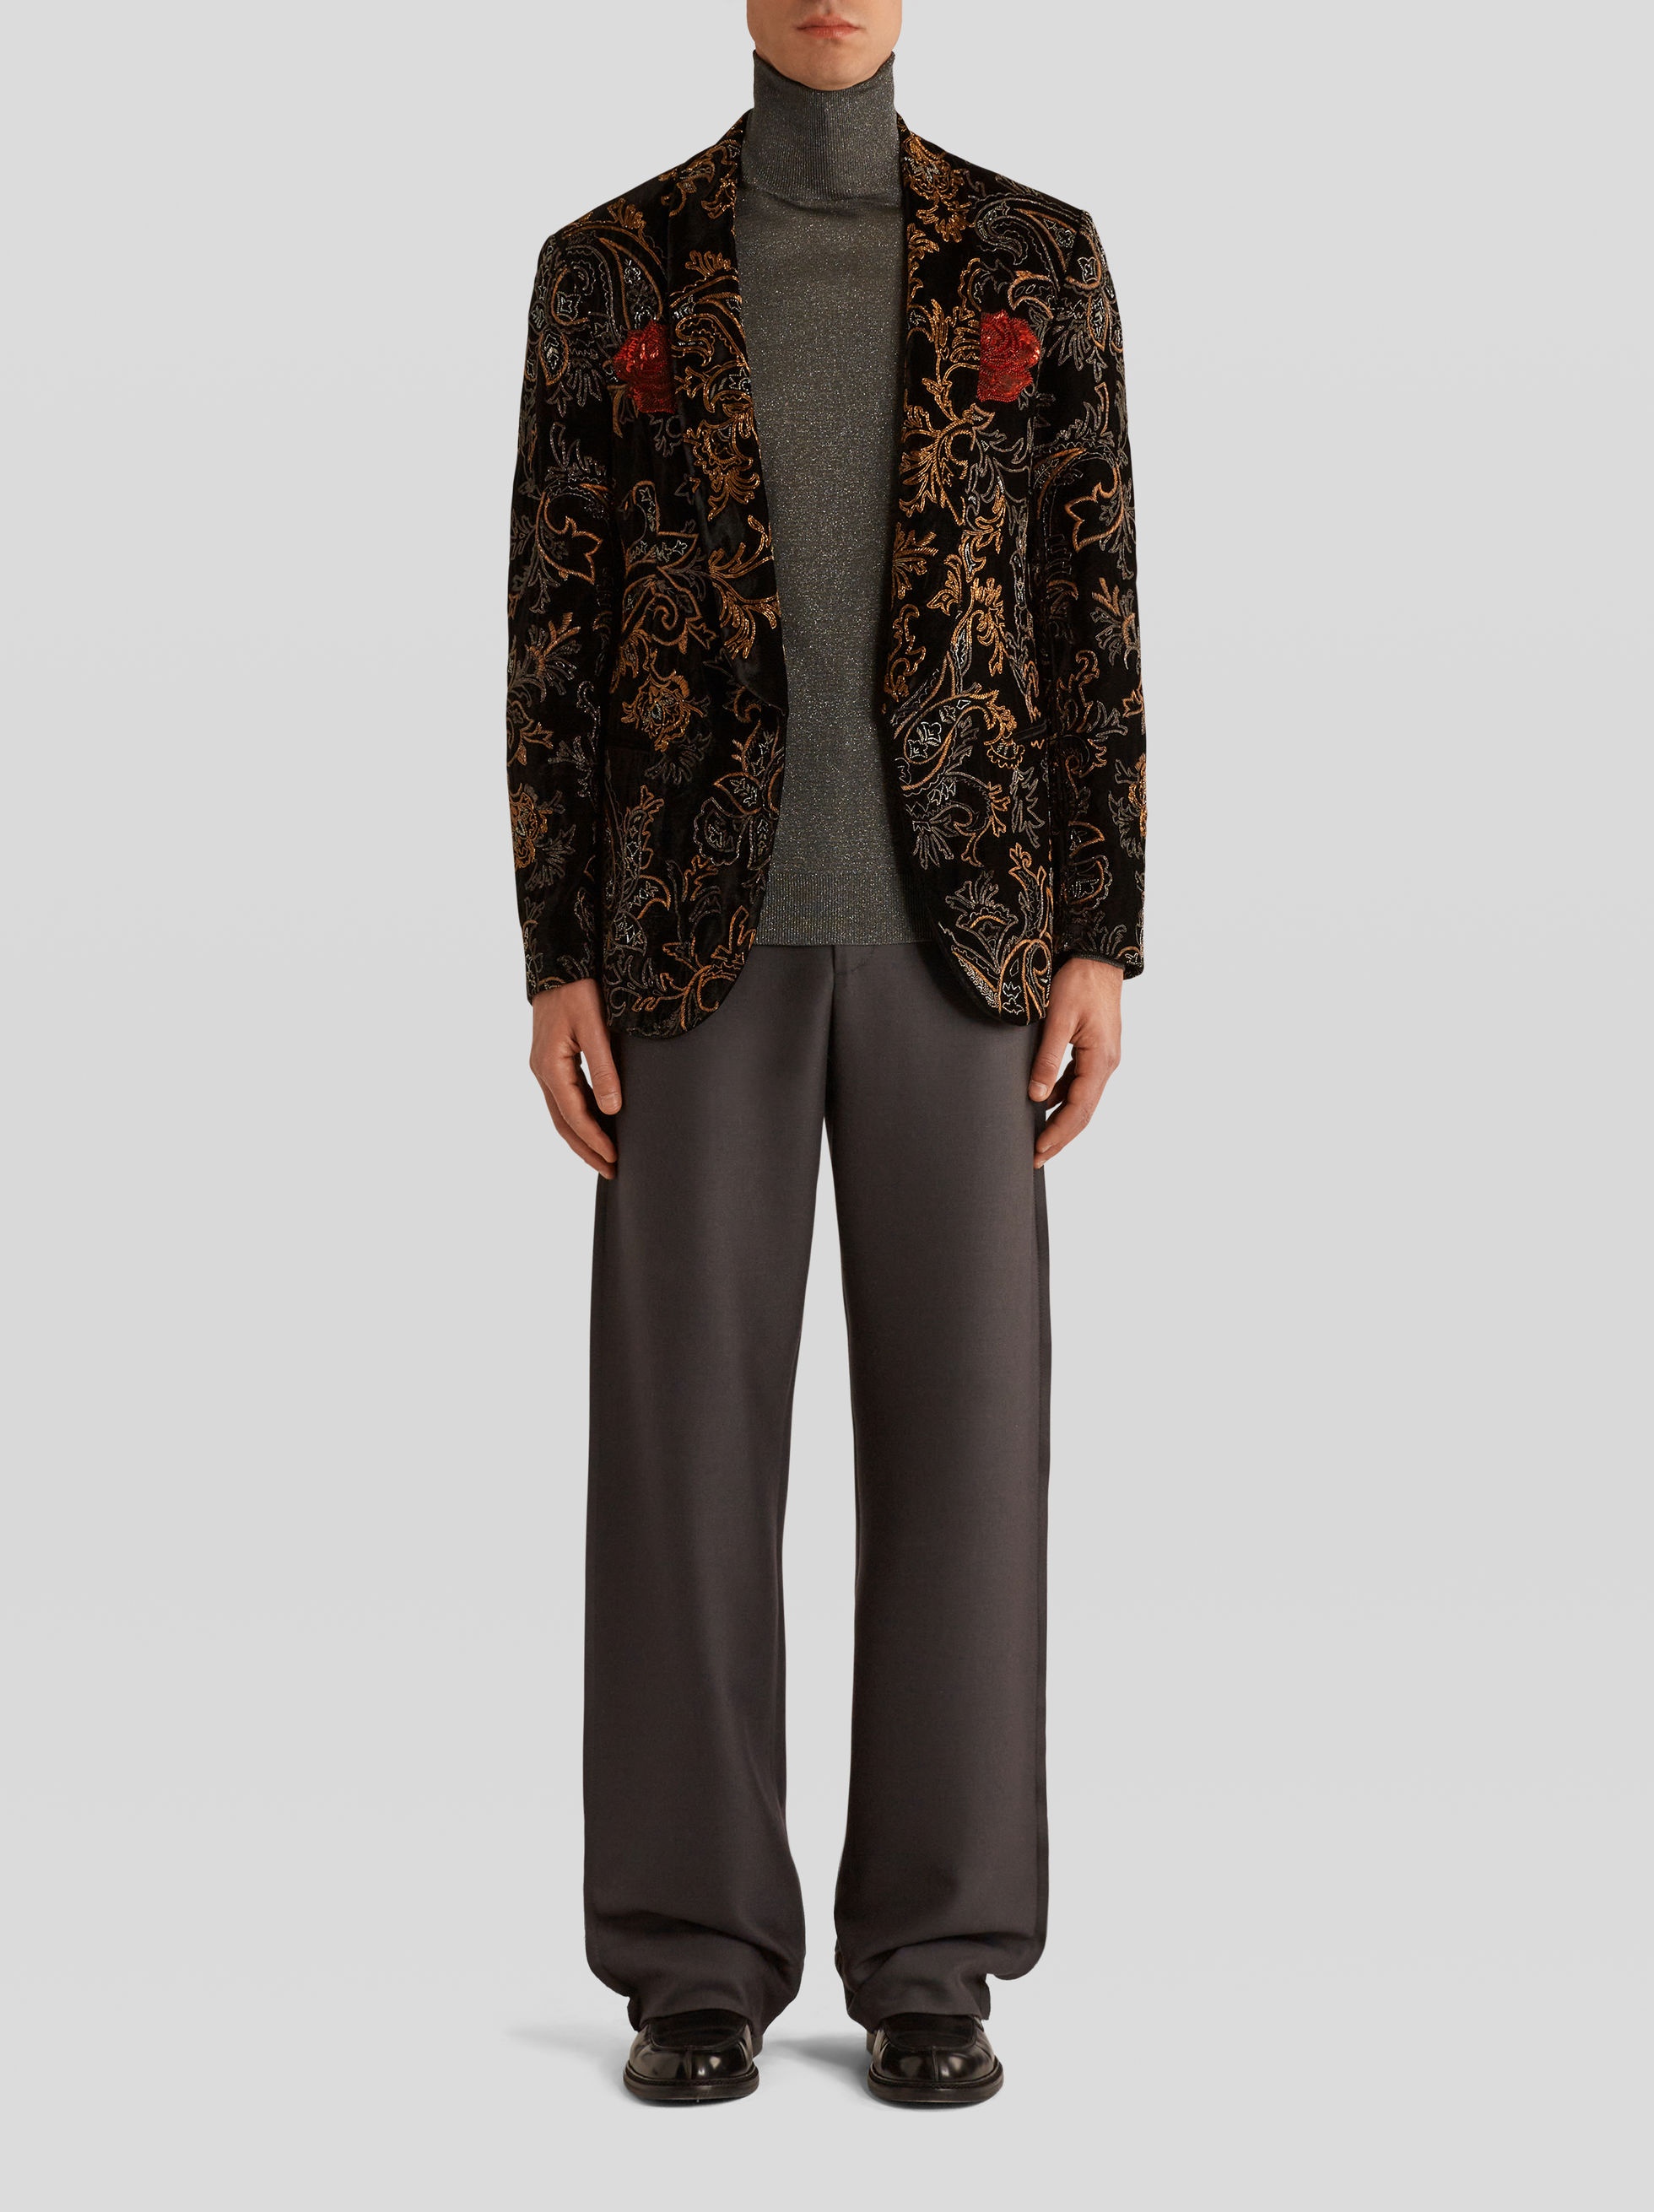 SEMI-TRADITIONAL JACKET EMBROIDERED WITH PAISLEY PATTERNS AND ROSE - 3